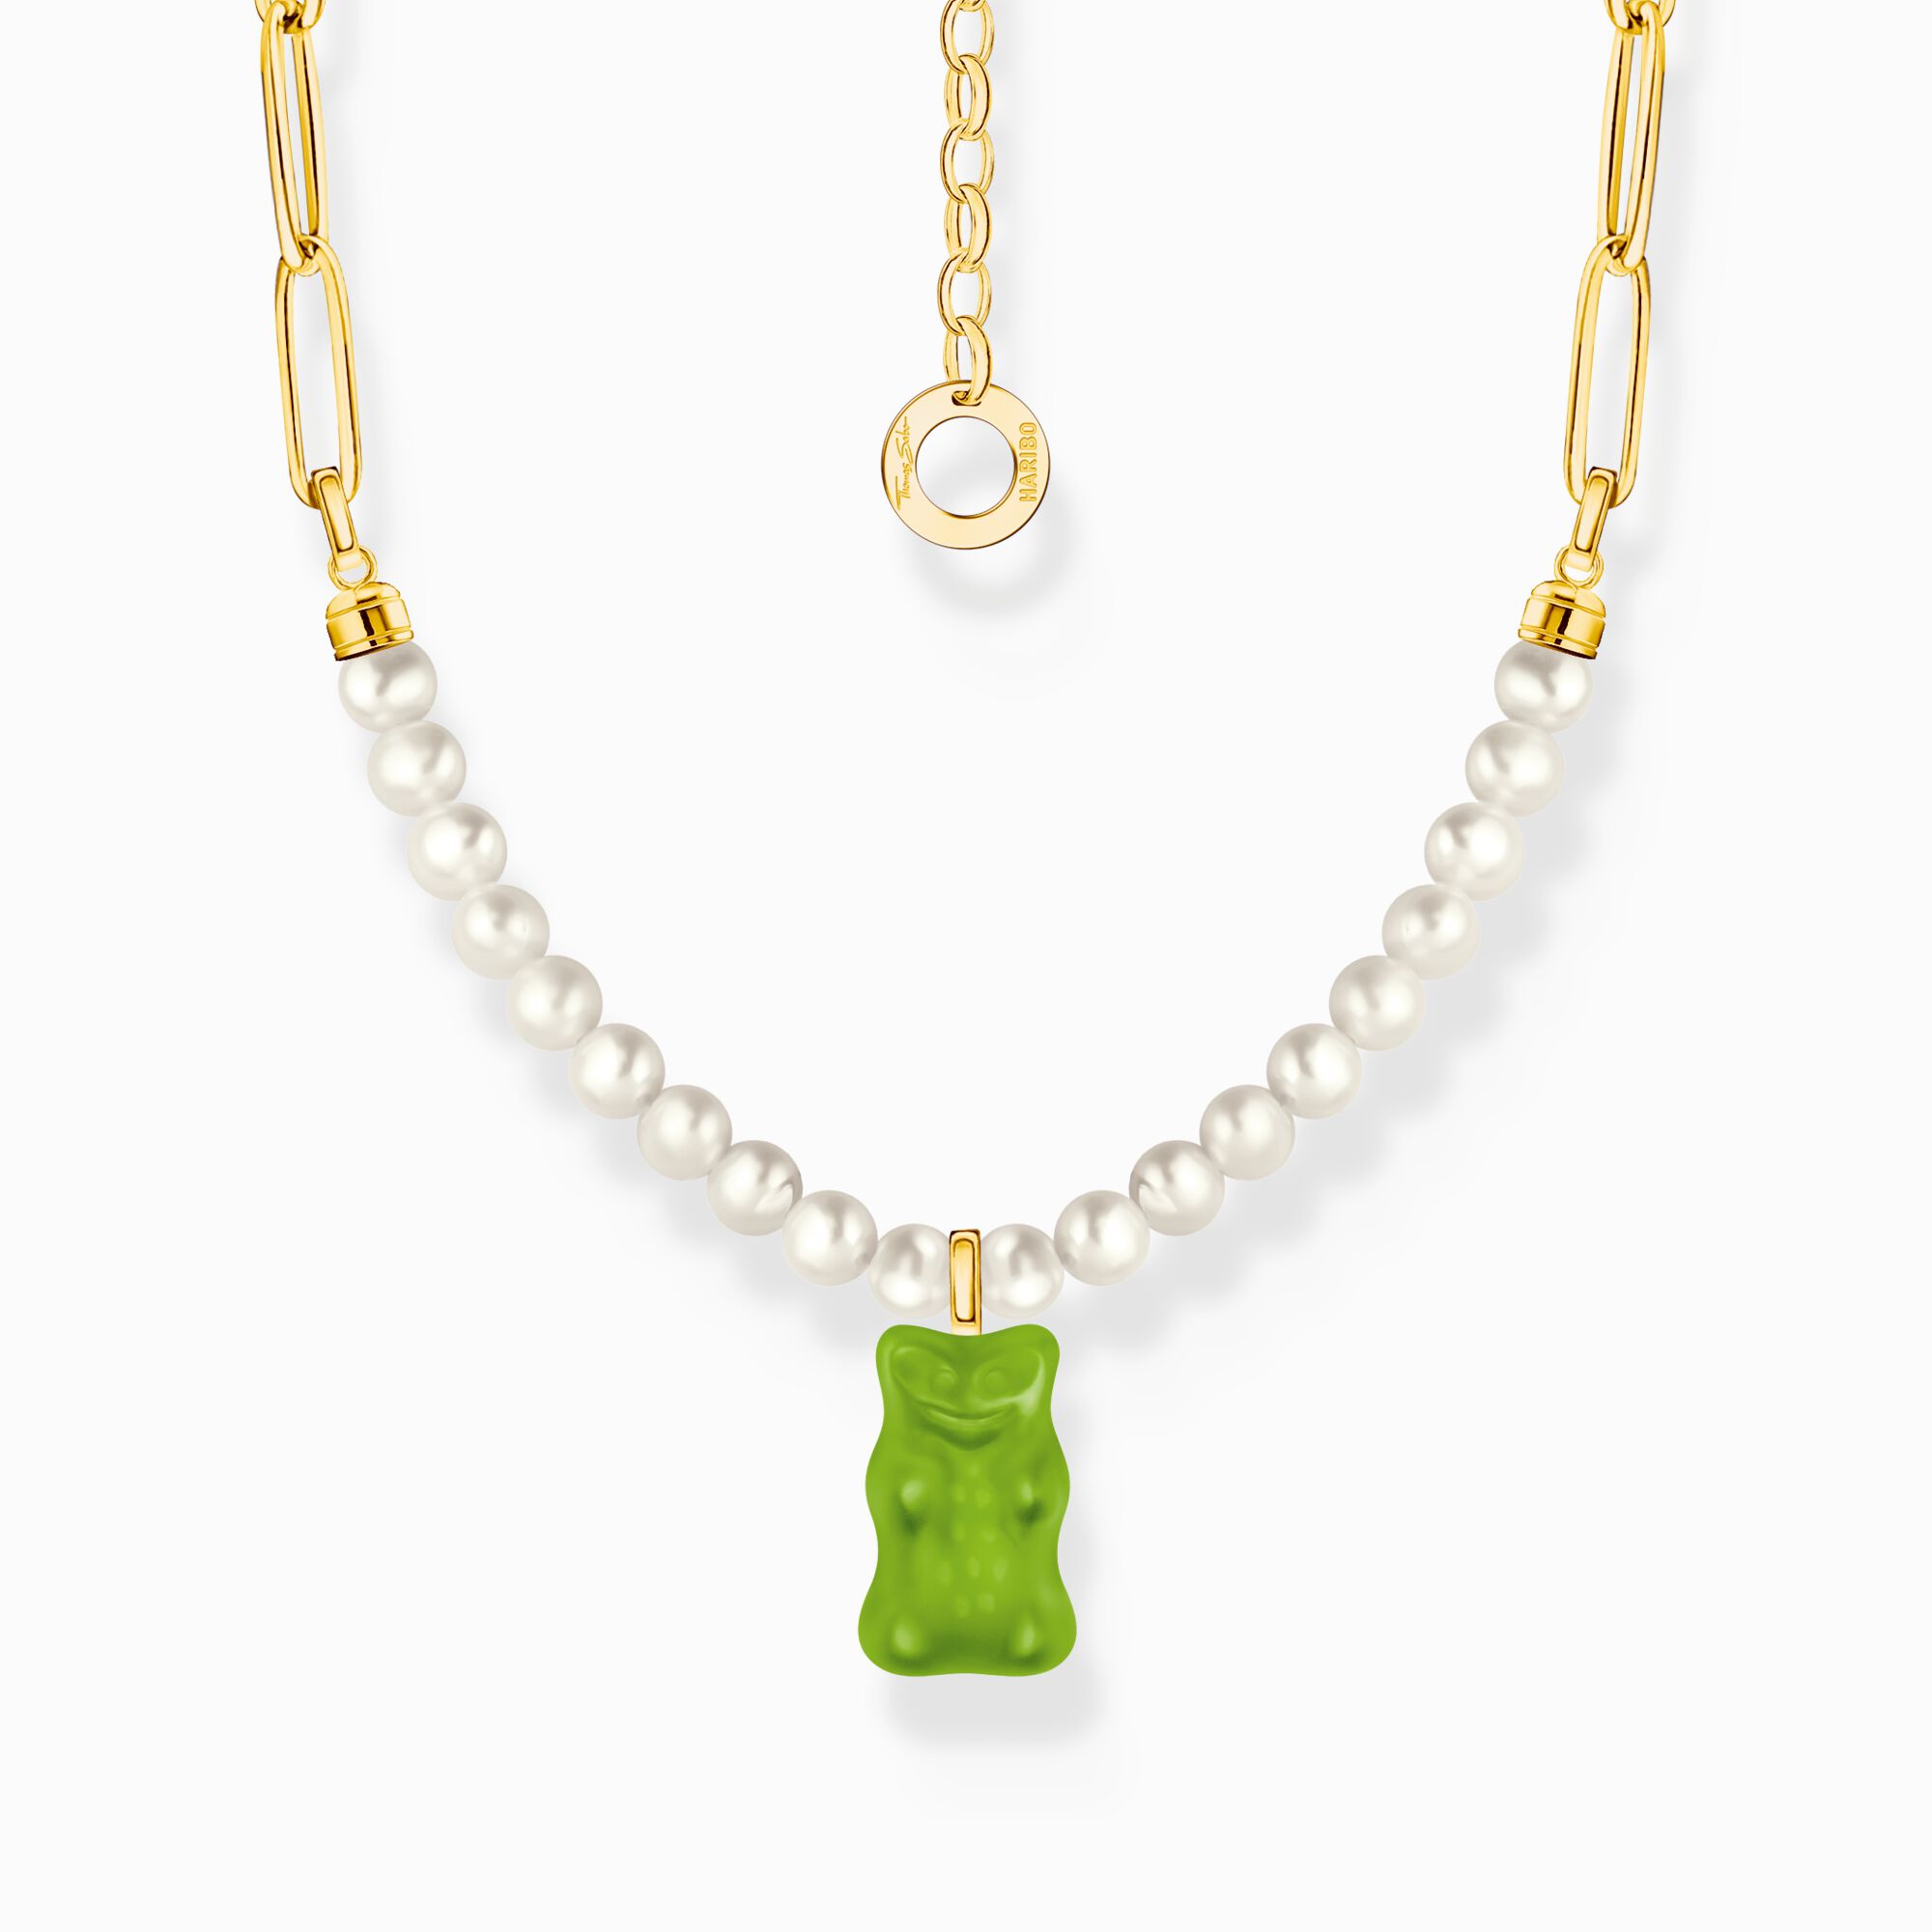 Gold-plated link necklace with green goldbears &amp; freshwater pearls from the Charming Collection collection in the THOMAS SABO online store